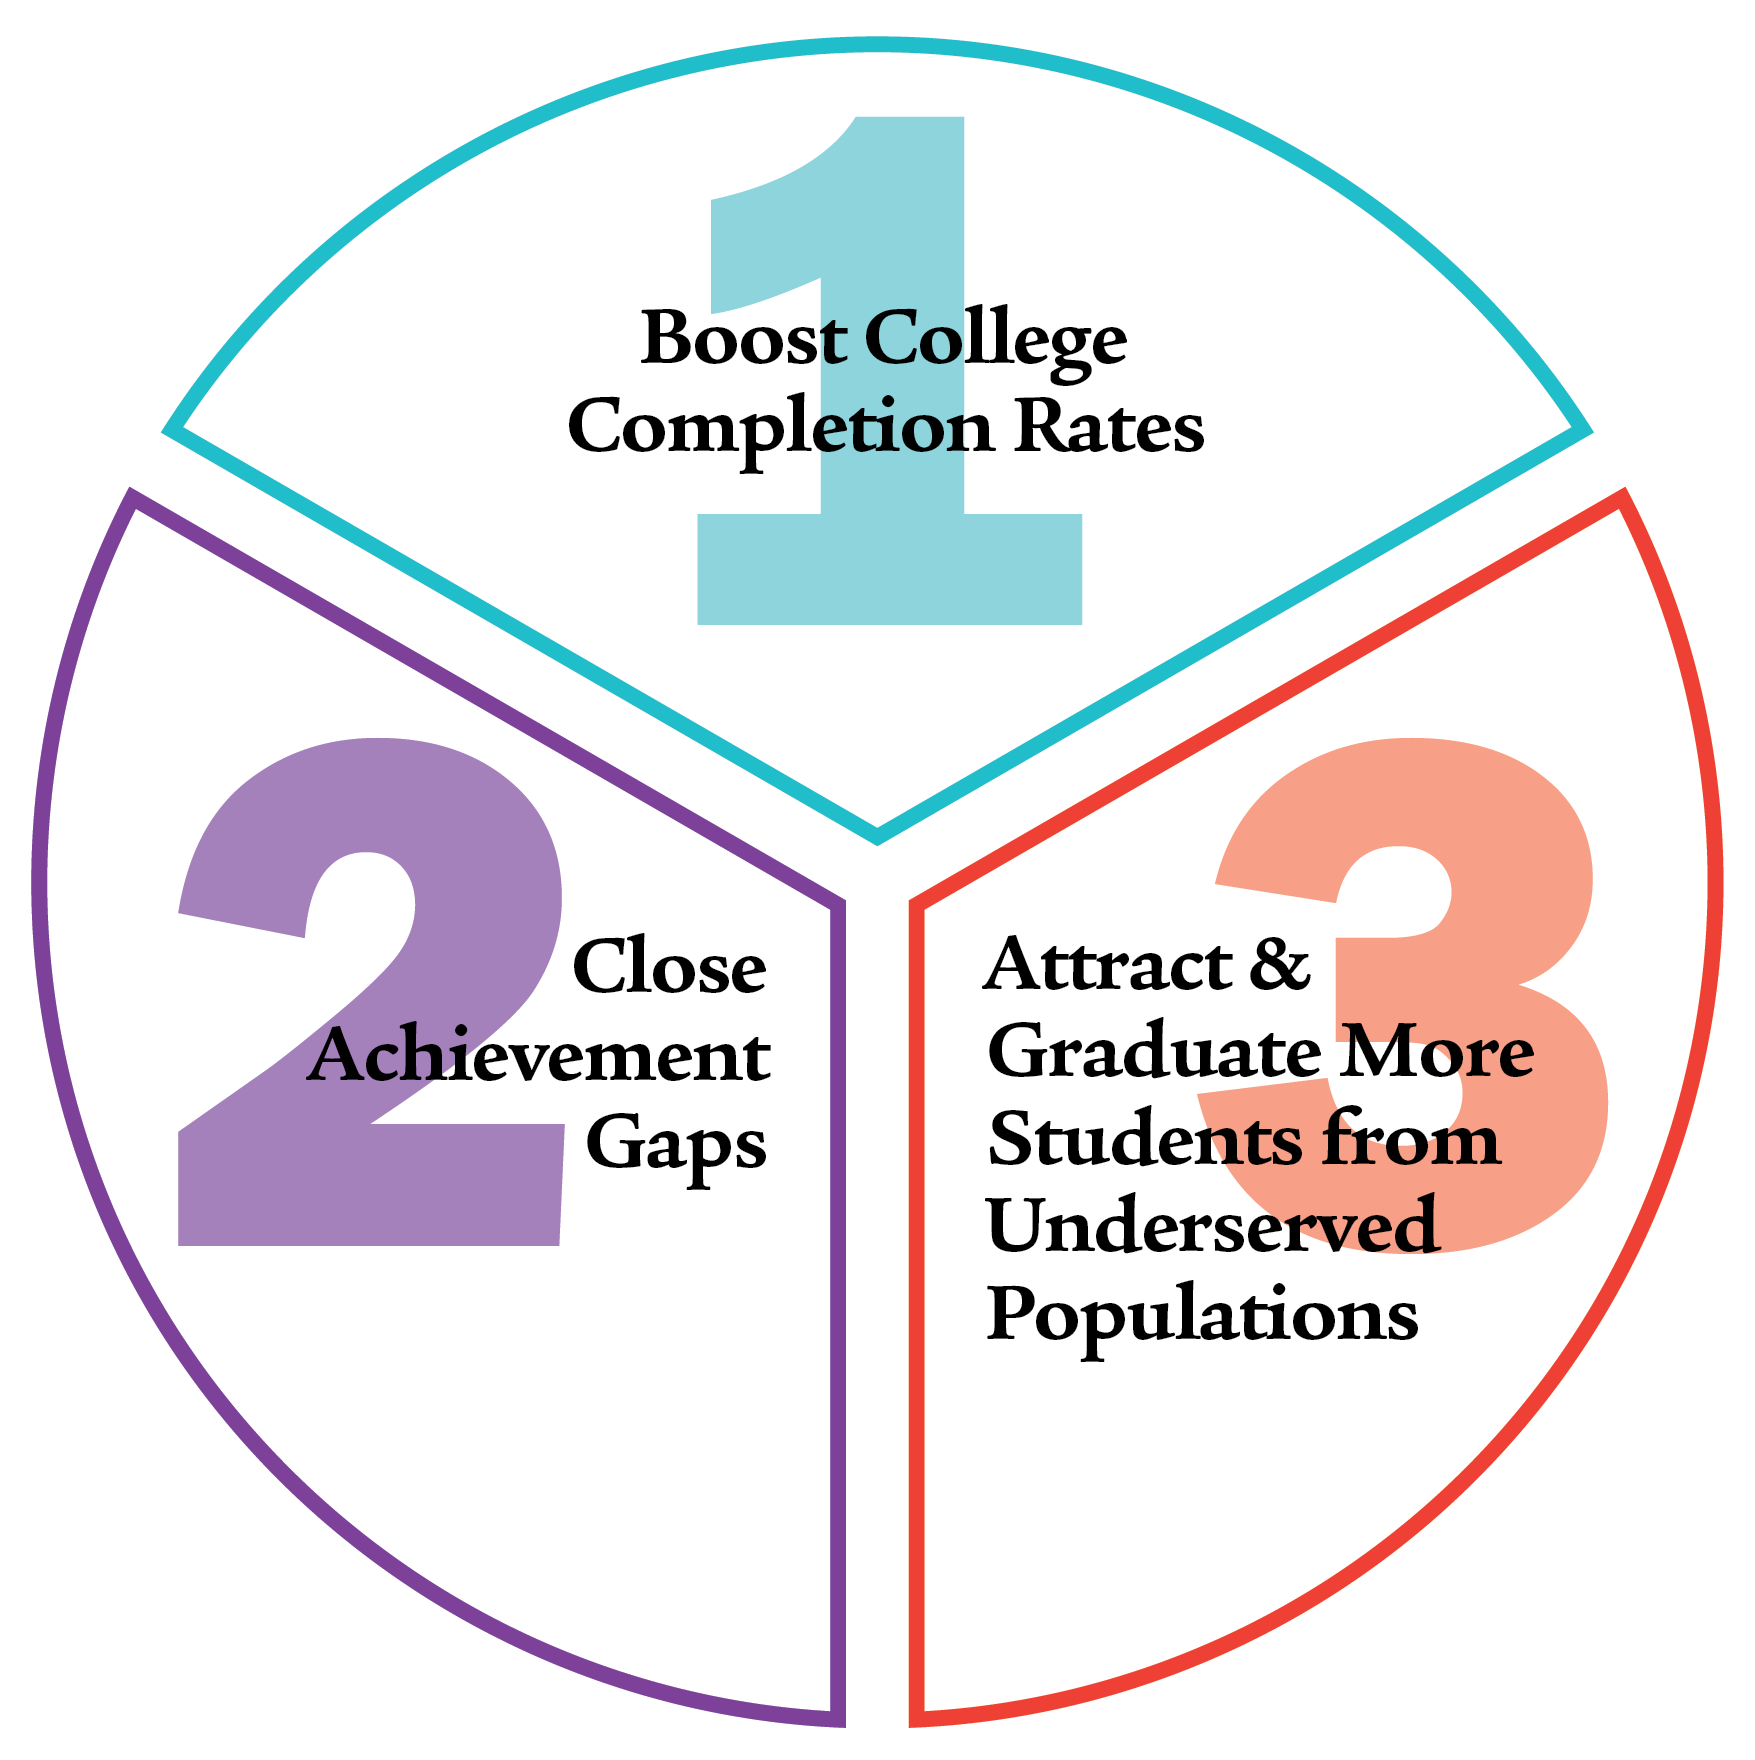 The 'Big Three' Completion plan focuses on boosting college completion rates, closing achievement gaps, and attracting and graduating more students from underserved populations.